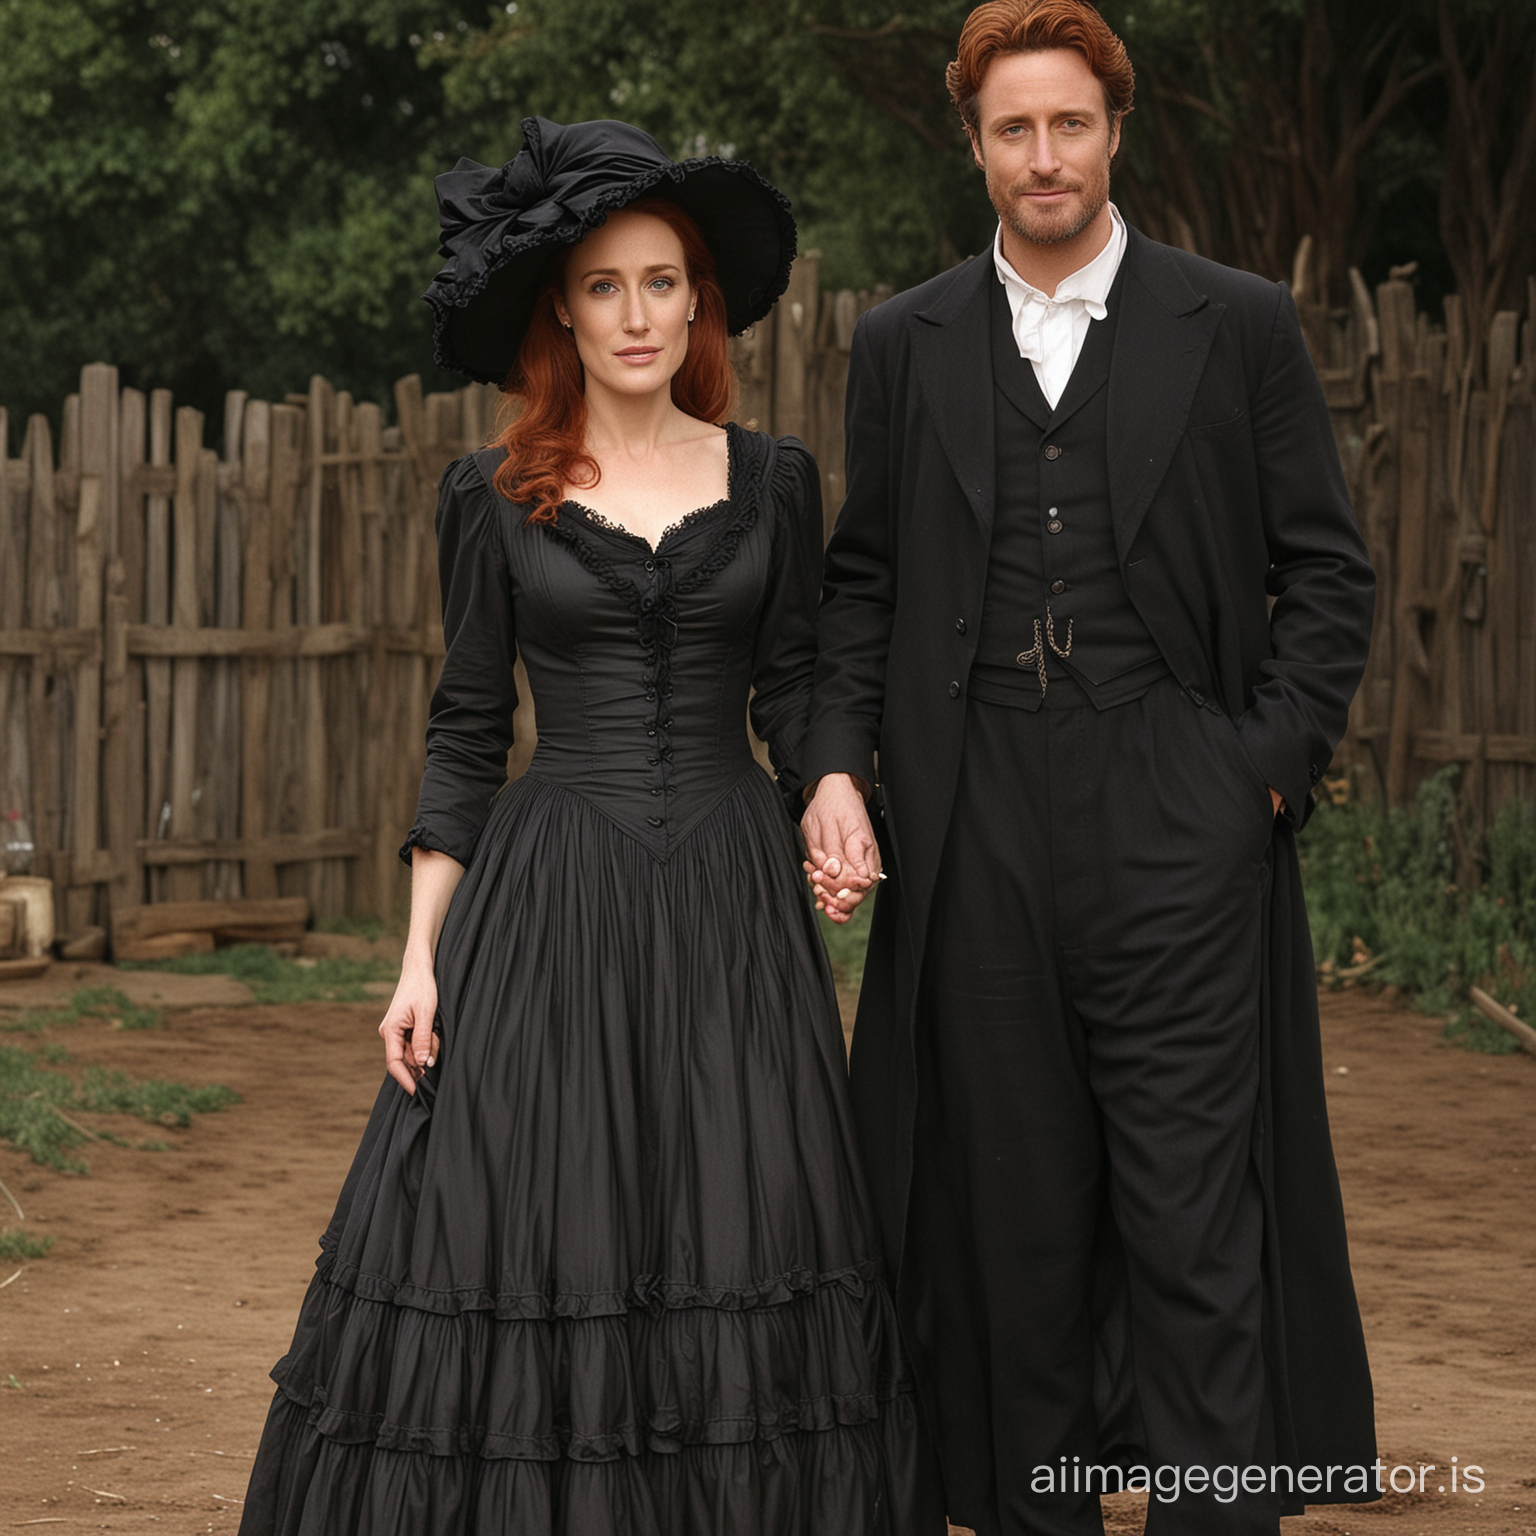 red haired Gillian Anderson dressed as an old west farmer's wife wearing a black floor-length loose billowing old west poofy modest dress with layers of petticoats a long apron and a frilly bonnet hand in hand with an old farmer dressed into a black suit who seems to be her newlywed husband